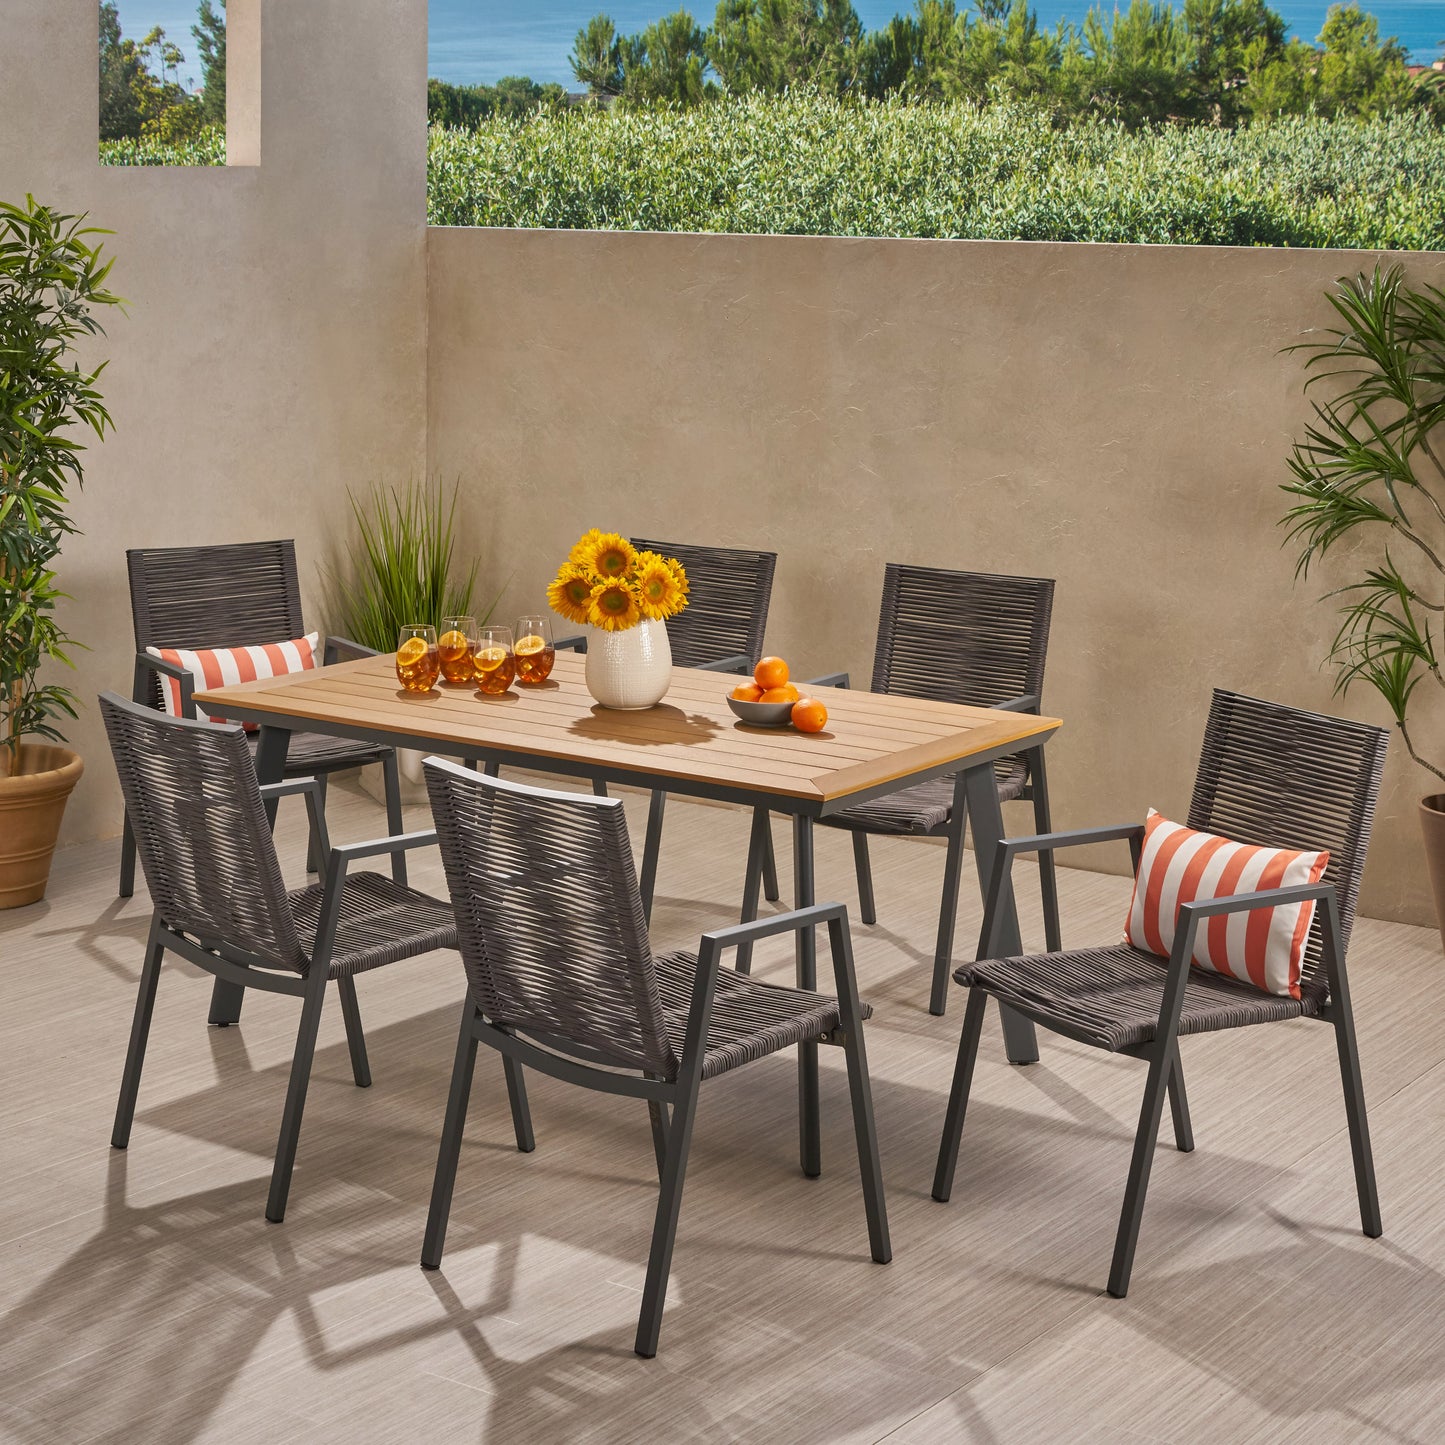 Asir Outdoor Modern 6 Seater Aluminum Dining Set with Faux Wood Table Top